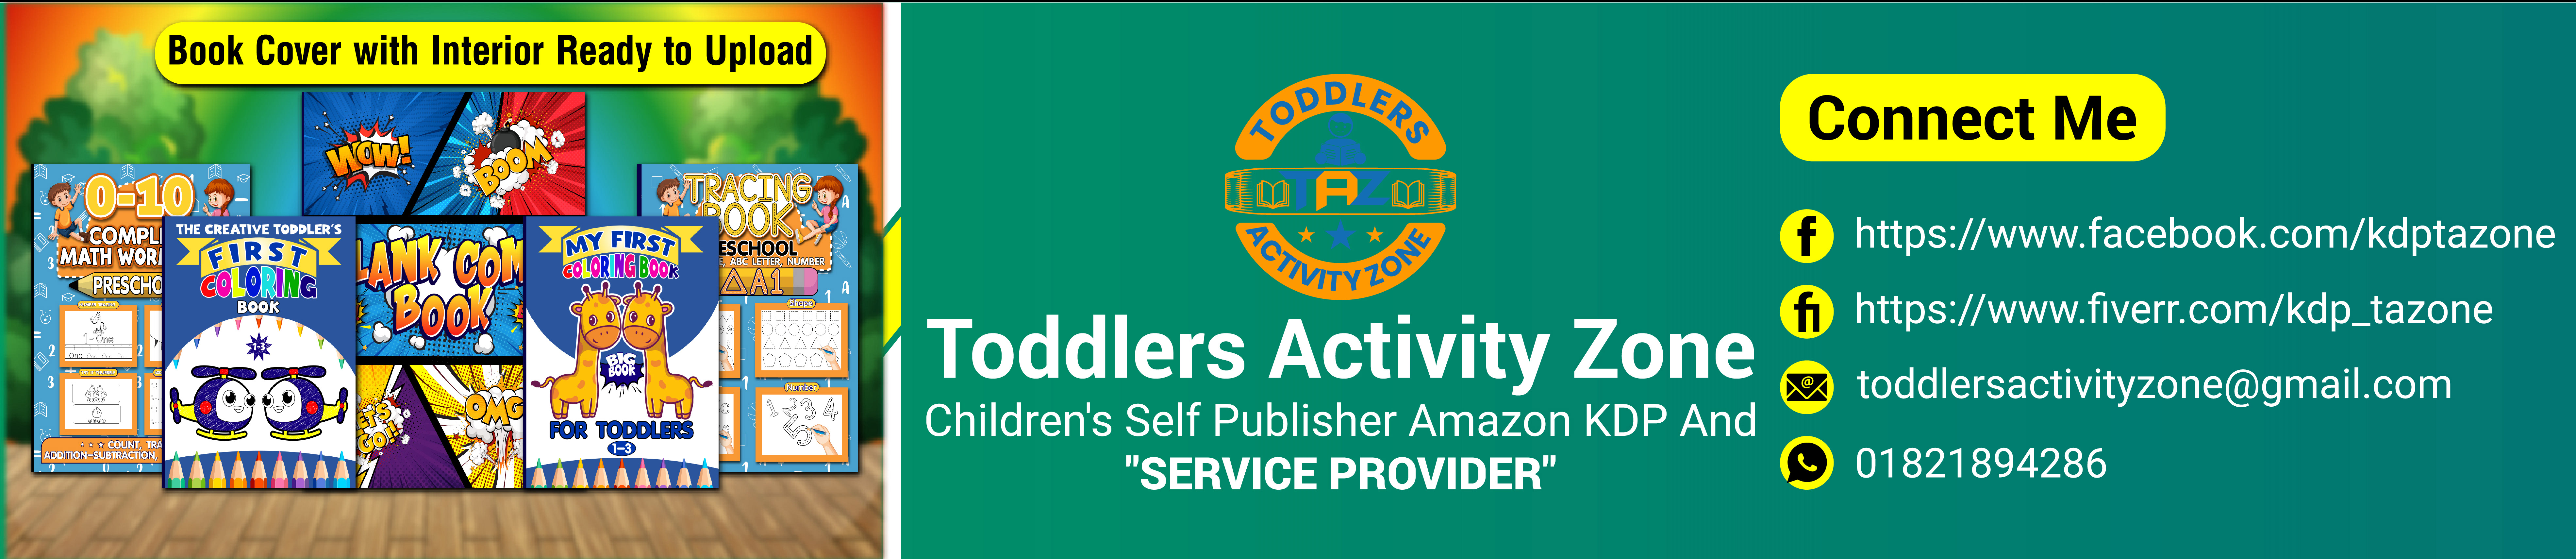 Toddlers Activity Zone's profile banner